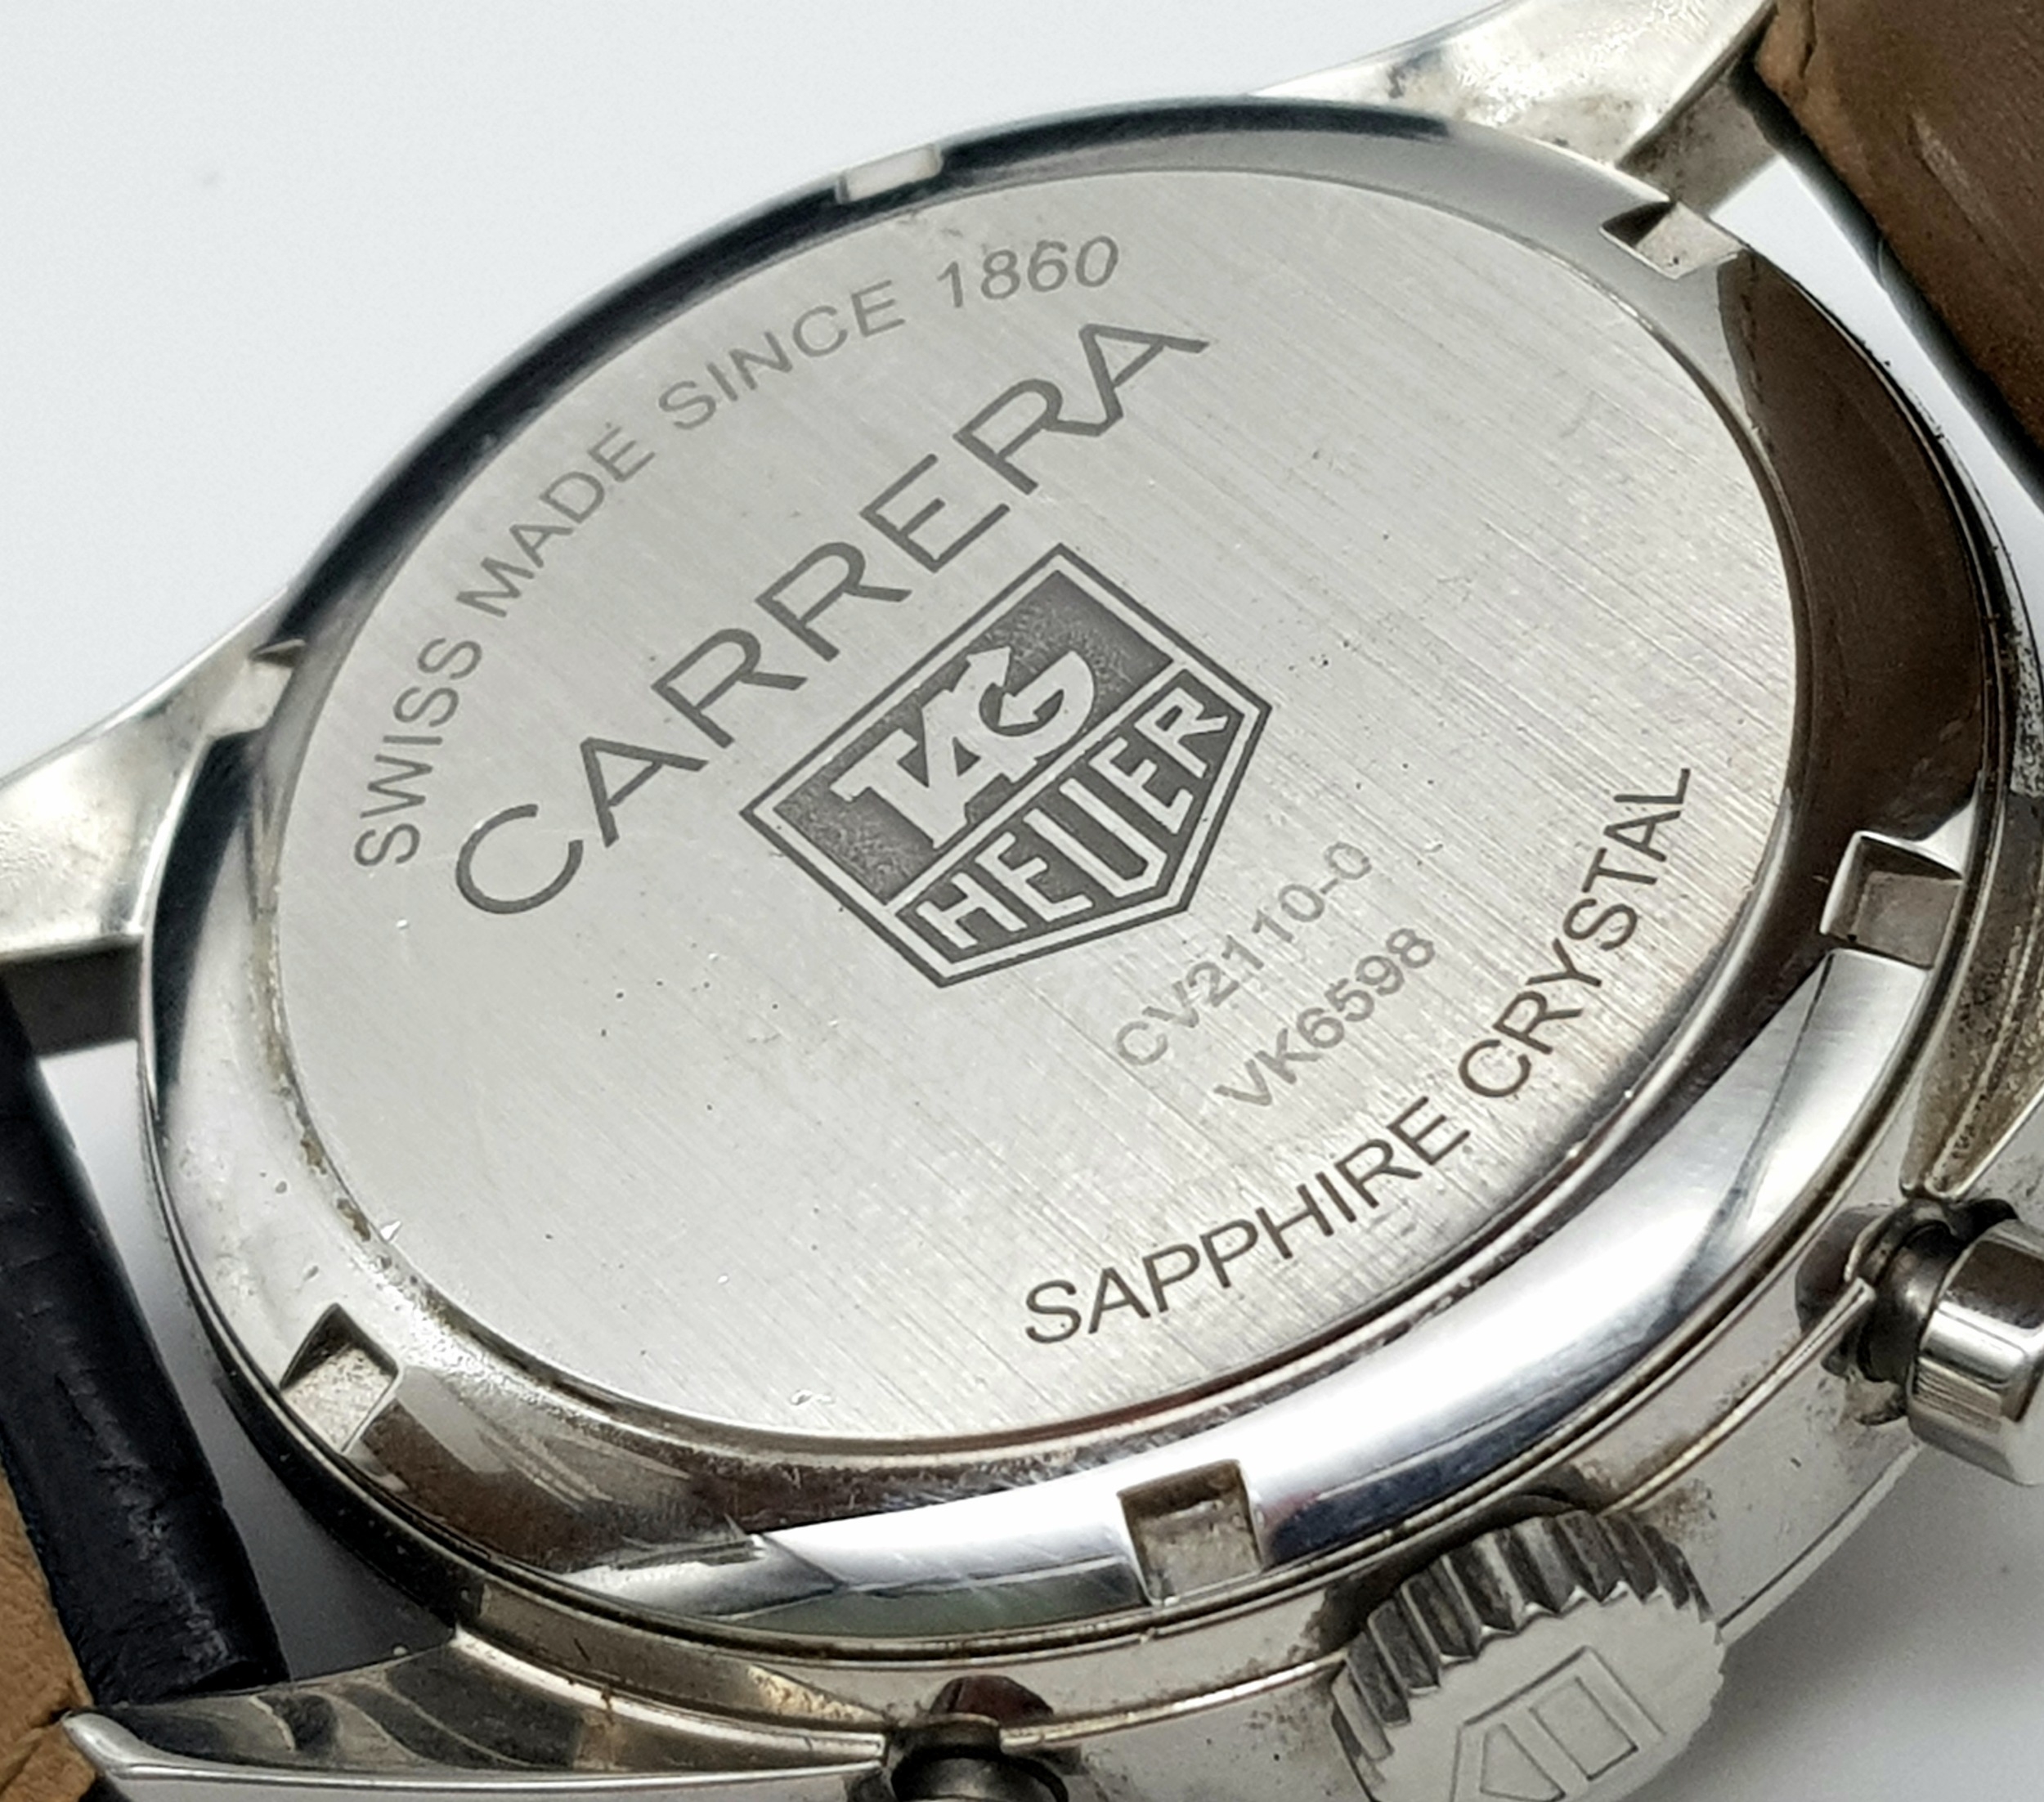 A Tag Heuer Carrera Automatic Chronograph Gents Watch. Black leather Tag strap. Stainless steel case - Image 6 of 10